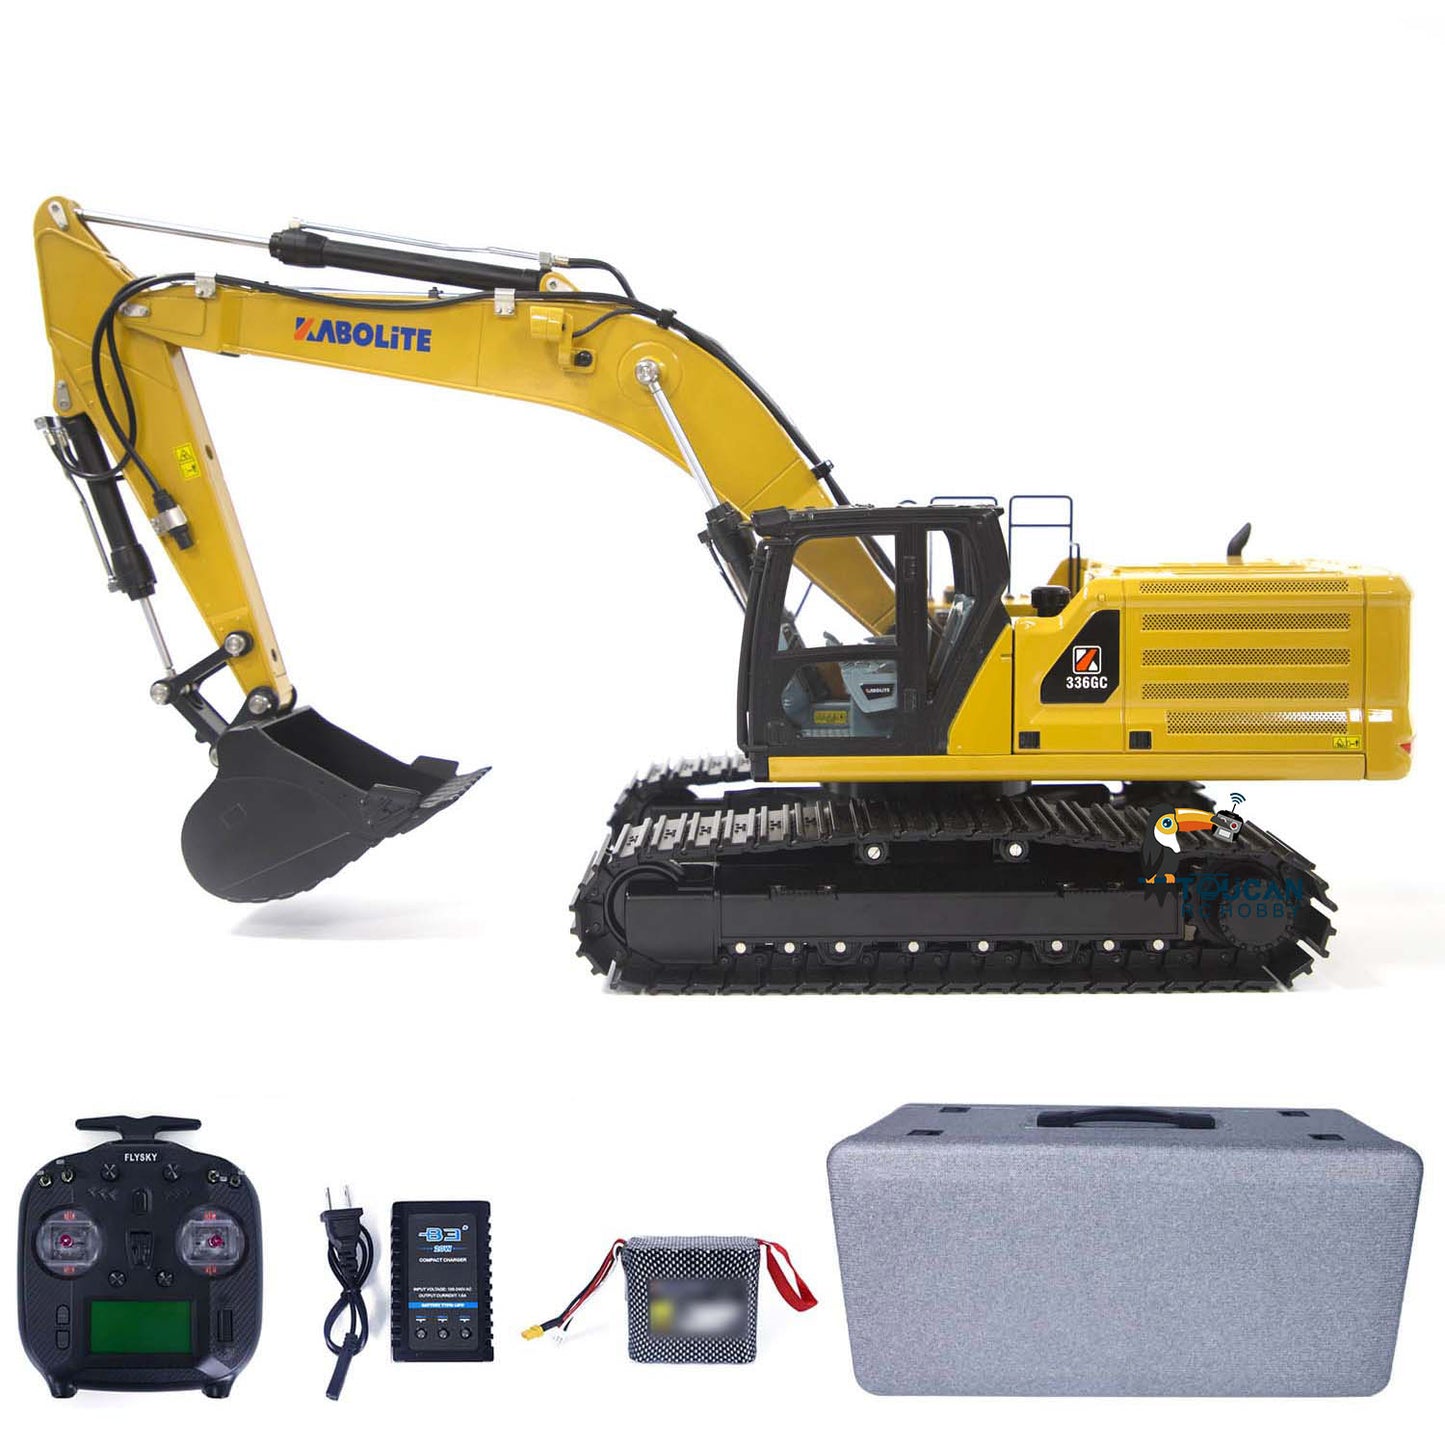 IN STOCK Kabolite K961 100 1/18 Metal RC Hydraulic Excavator RTR RC Digger Remote Control Vehicles Model ST8 Remote Controller